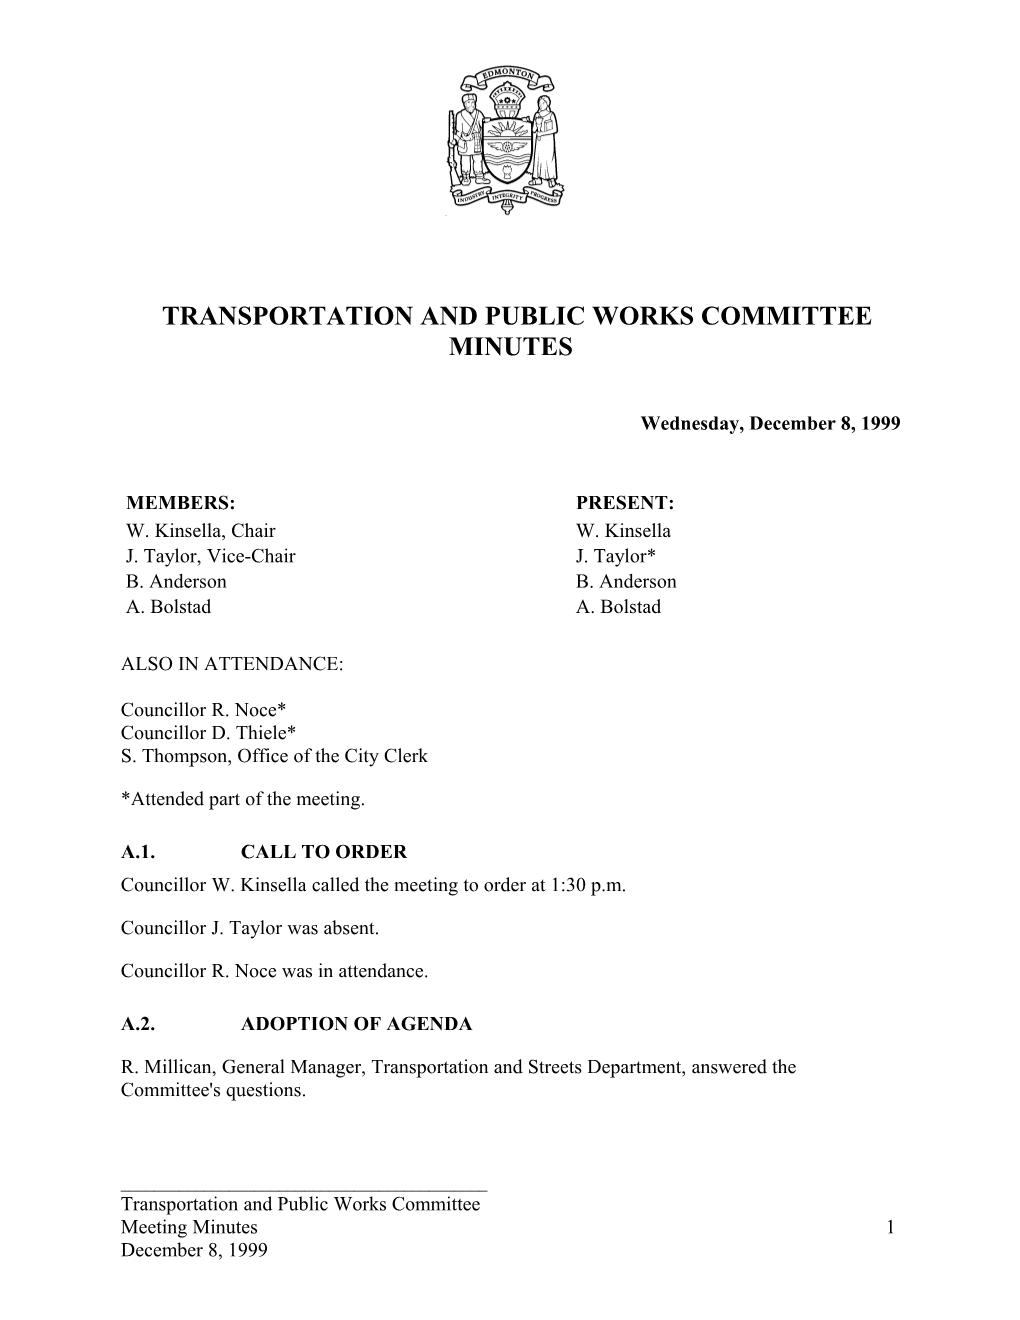 Minutes for Transportation and Public Works Committee December 8, 1999 Meeting